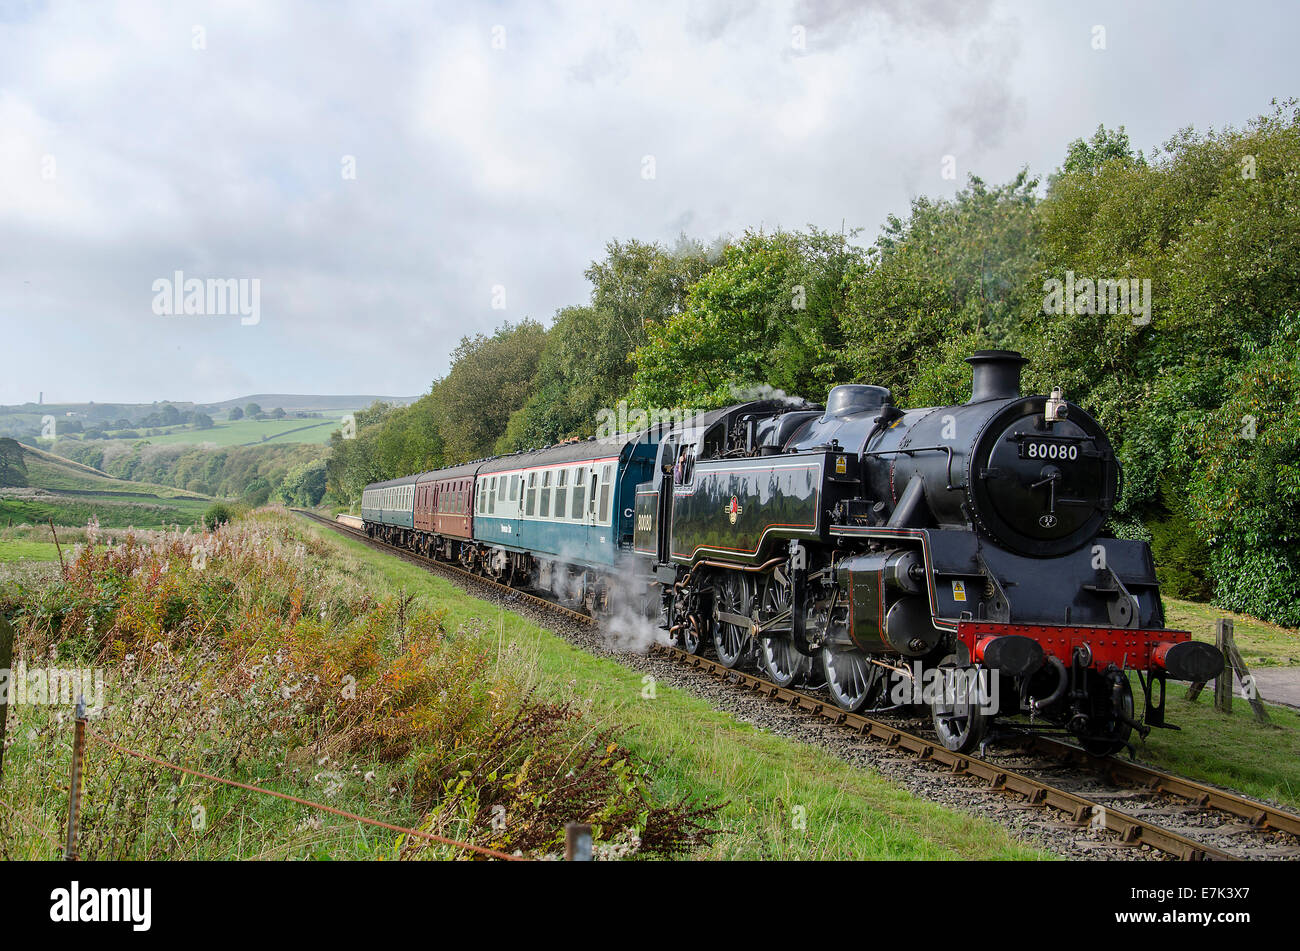 Heritage steam train at station on the east lancashire railway Stock Photo